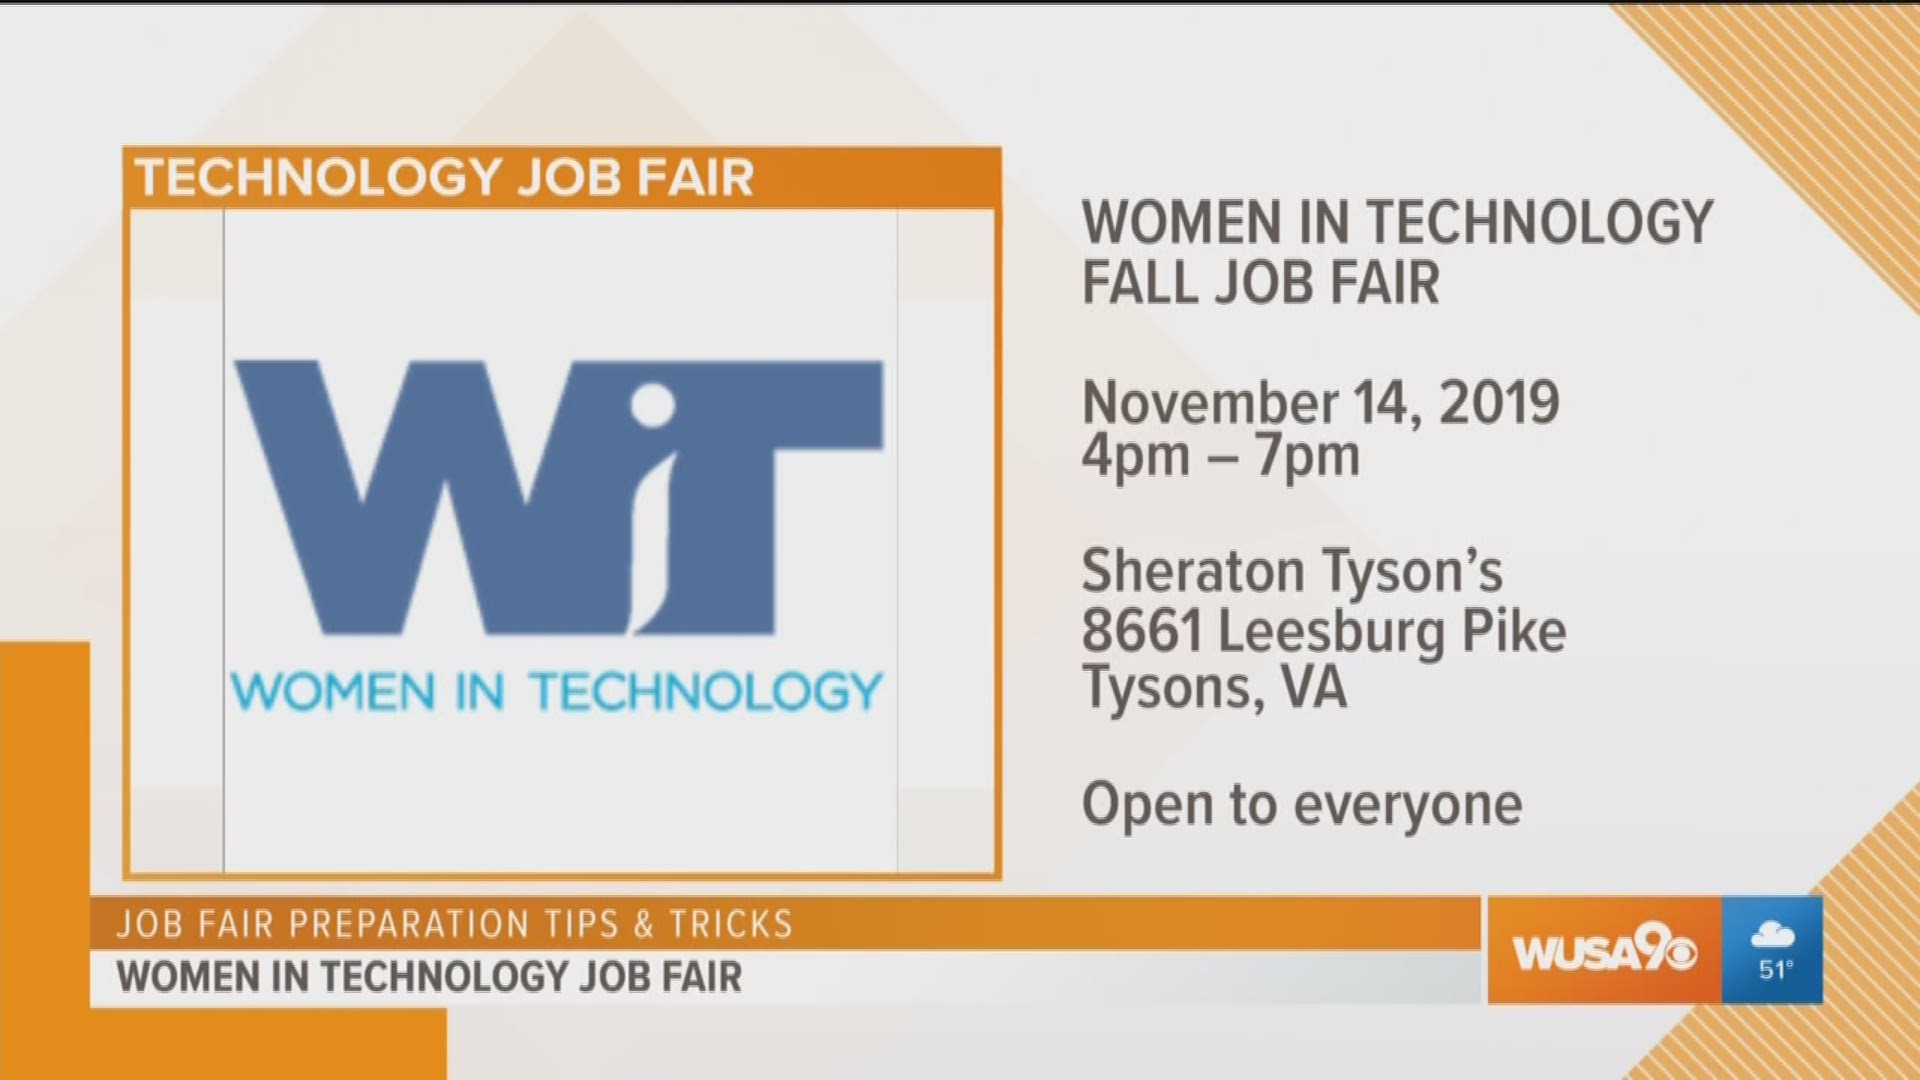 Daphne Wotherspoon and Carrie Drake of Women in Technology chat about the upcoming job fair on Nov. 14 in McLean, Va.